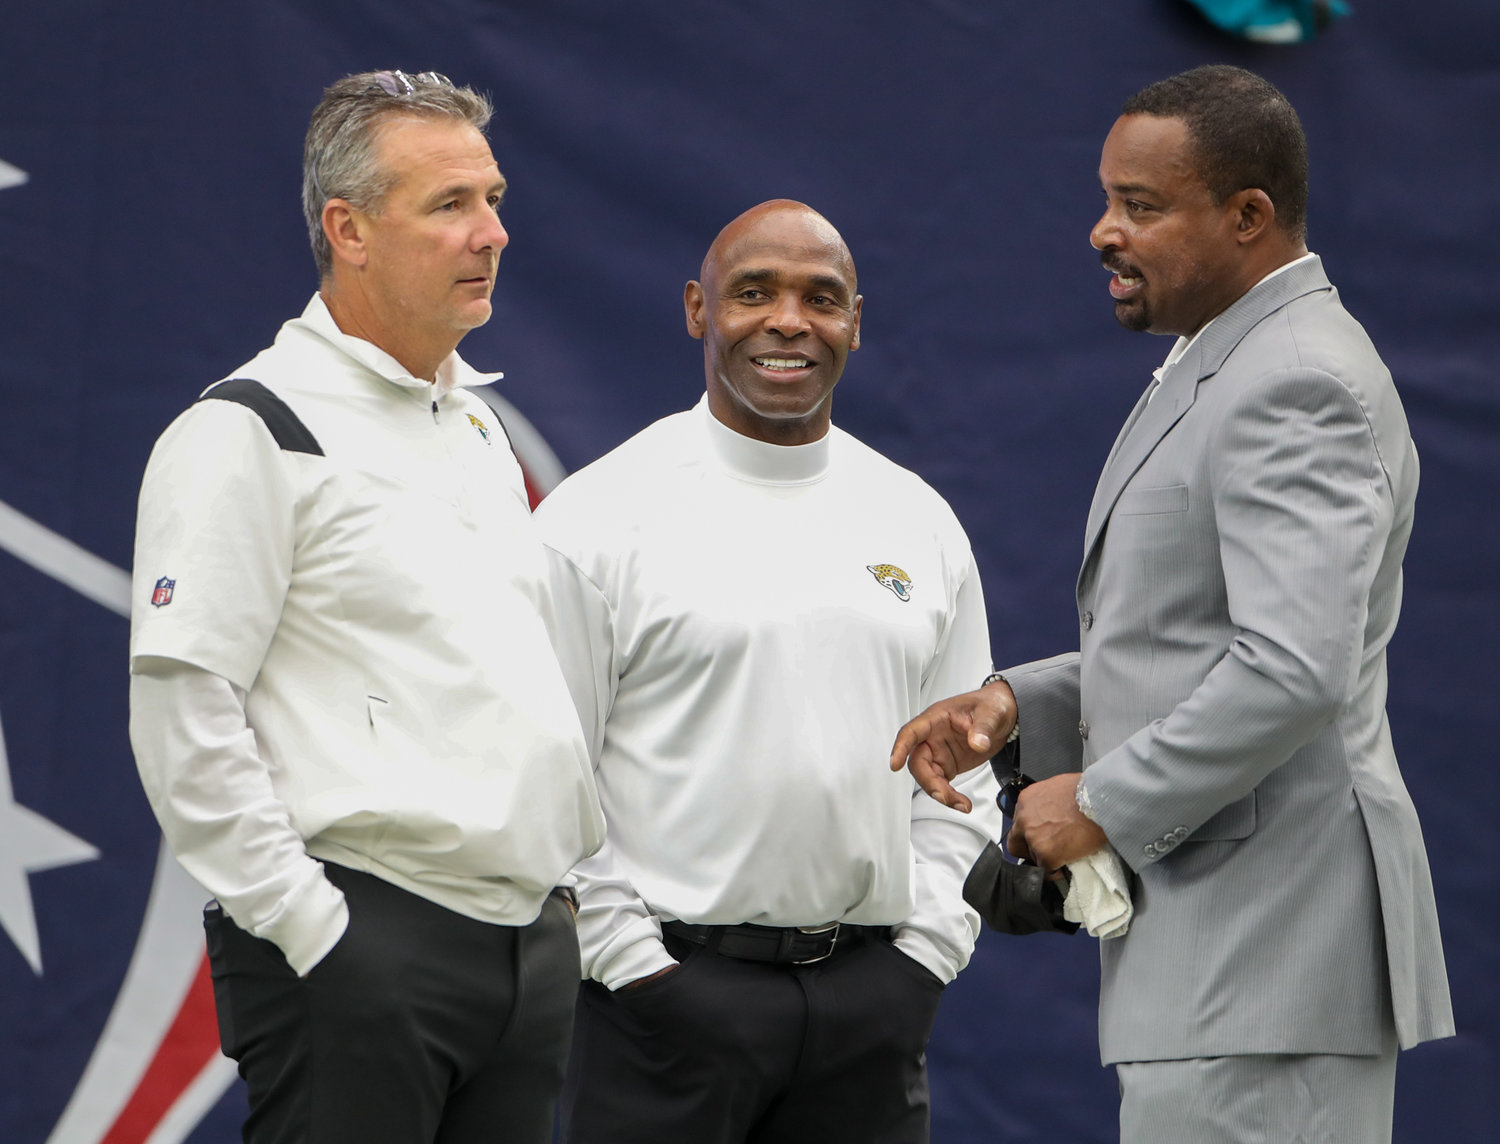 Jacksonville Jaguars head coach Urban Meyer (left) and assistant head coach Charlie Strong (center) before the start of an NFL game between the Houston Texans and the Jacksonville Jaguars on September 12, 2021 in Houston, Texas.